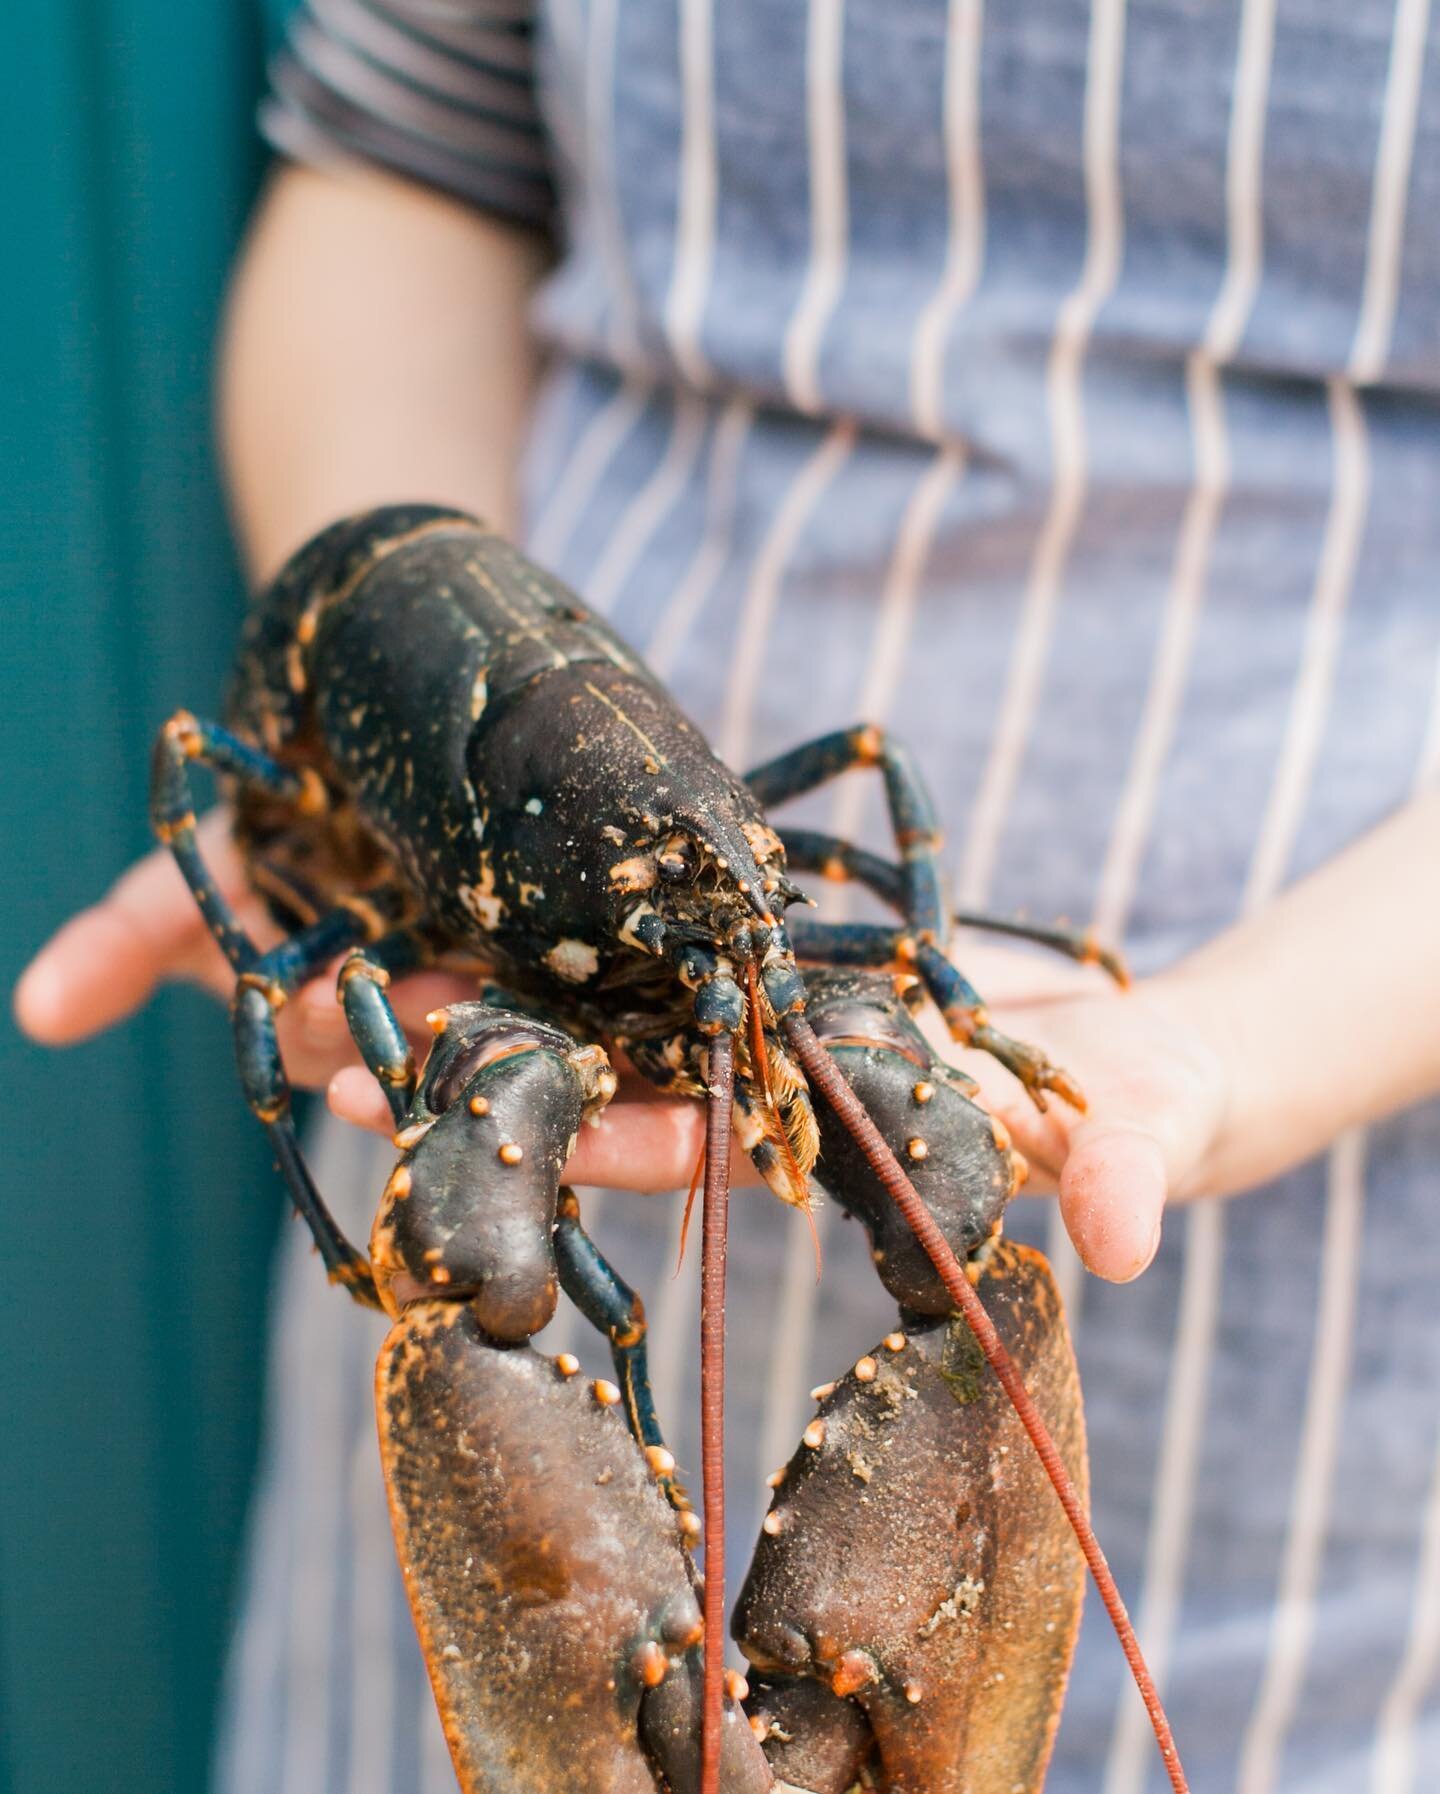 Lobster time! Did you know that lobsters have their seasons? 

Hard shelled lobsters will have more salty, savoury meat than the sweeter soft shelled ones.

So the best time to eat a lobster is when his shell is hard: this is after it has shed its sh